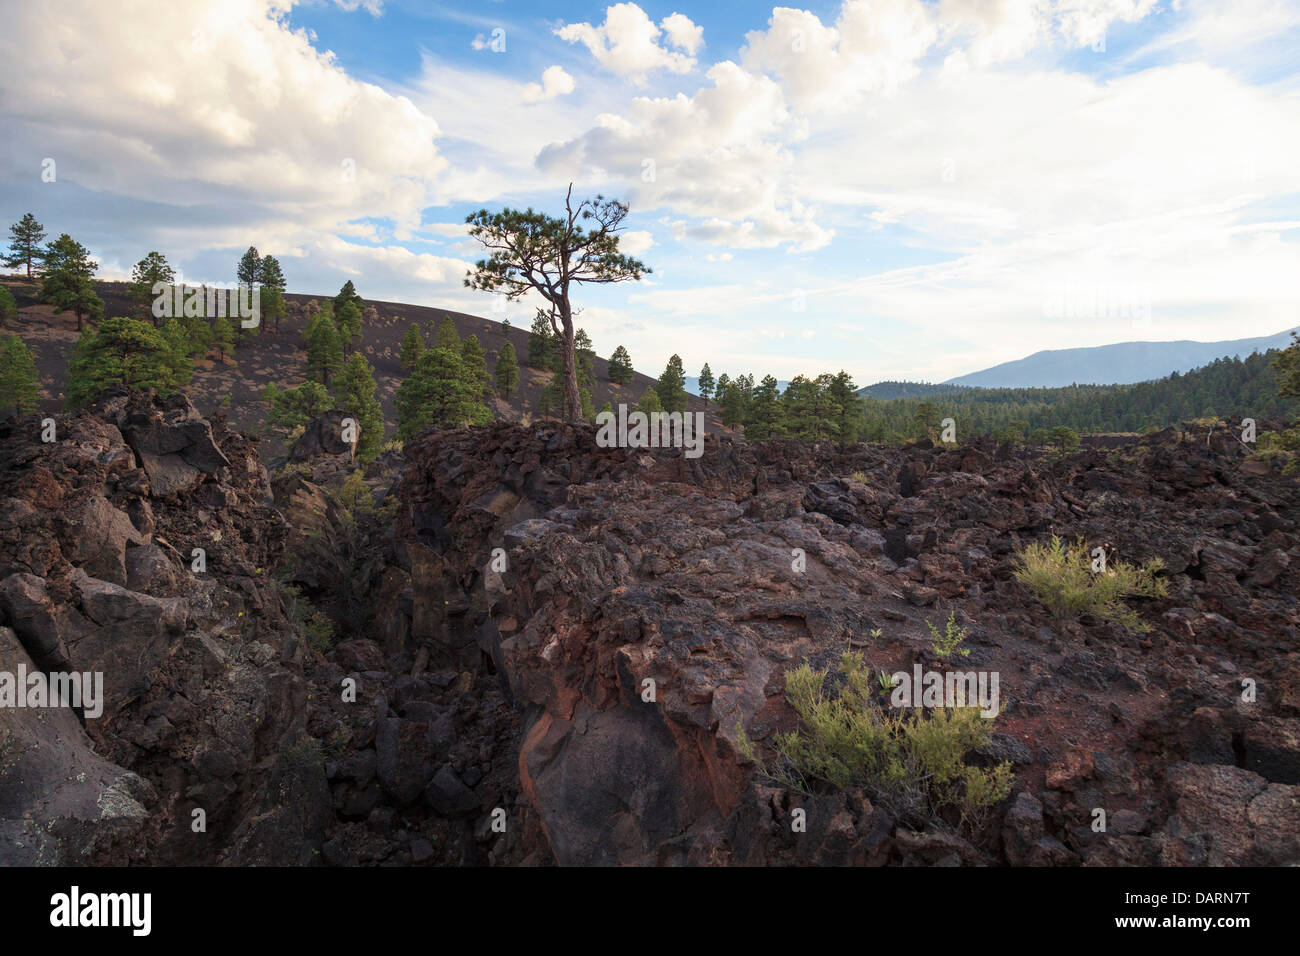 USA, Arizona, Flagstaff, Sunset Crater National Monument, Cinder Cones and Volcanic Landscape Stock Photo